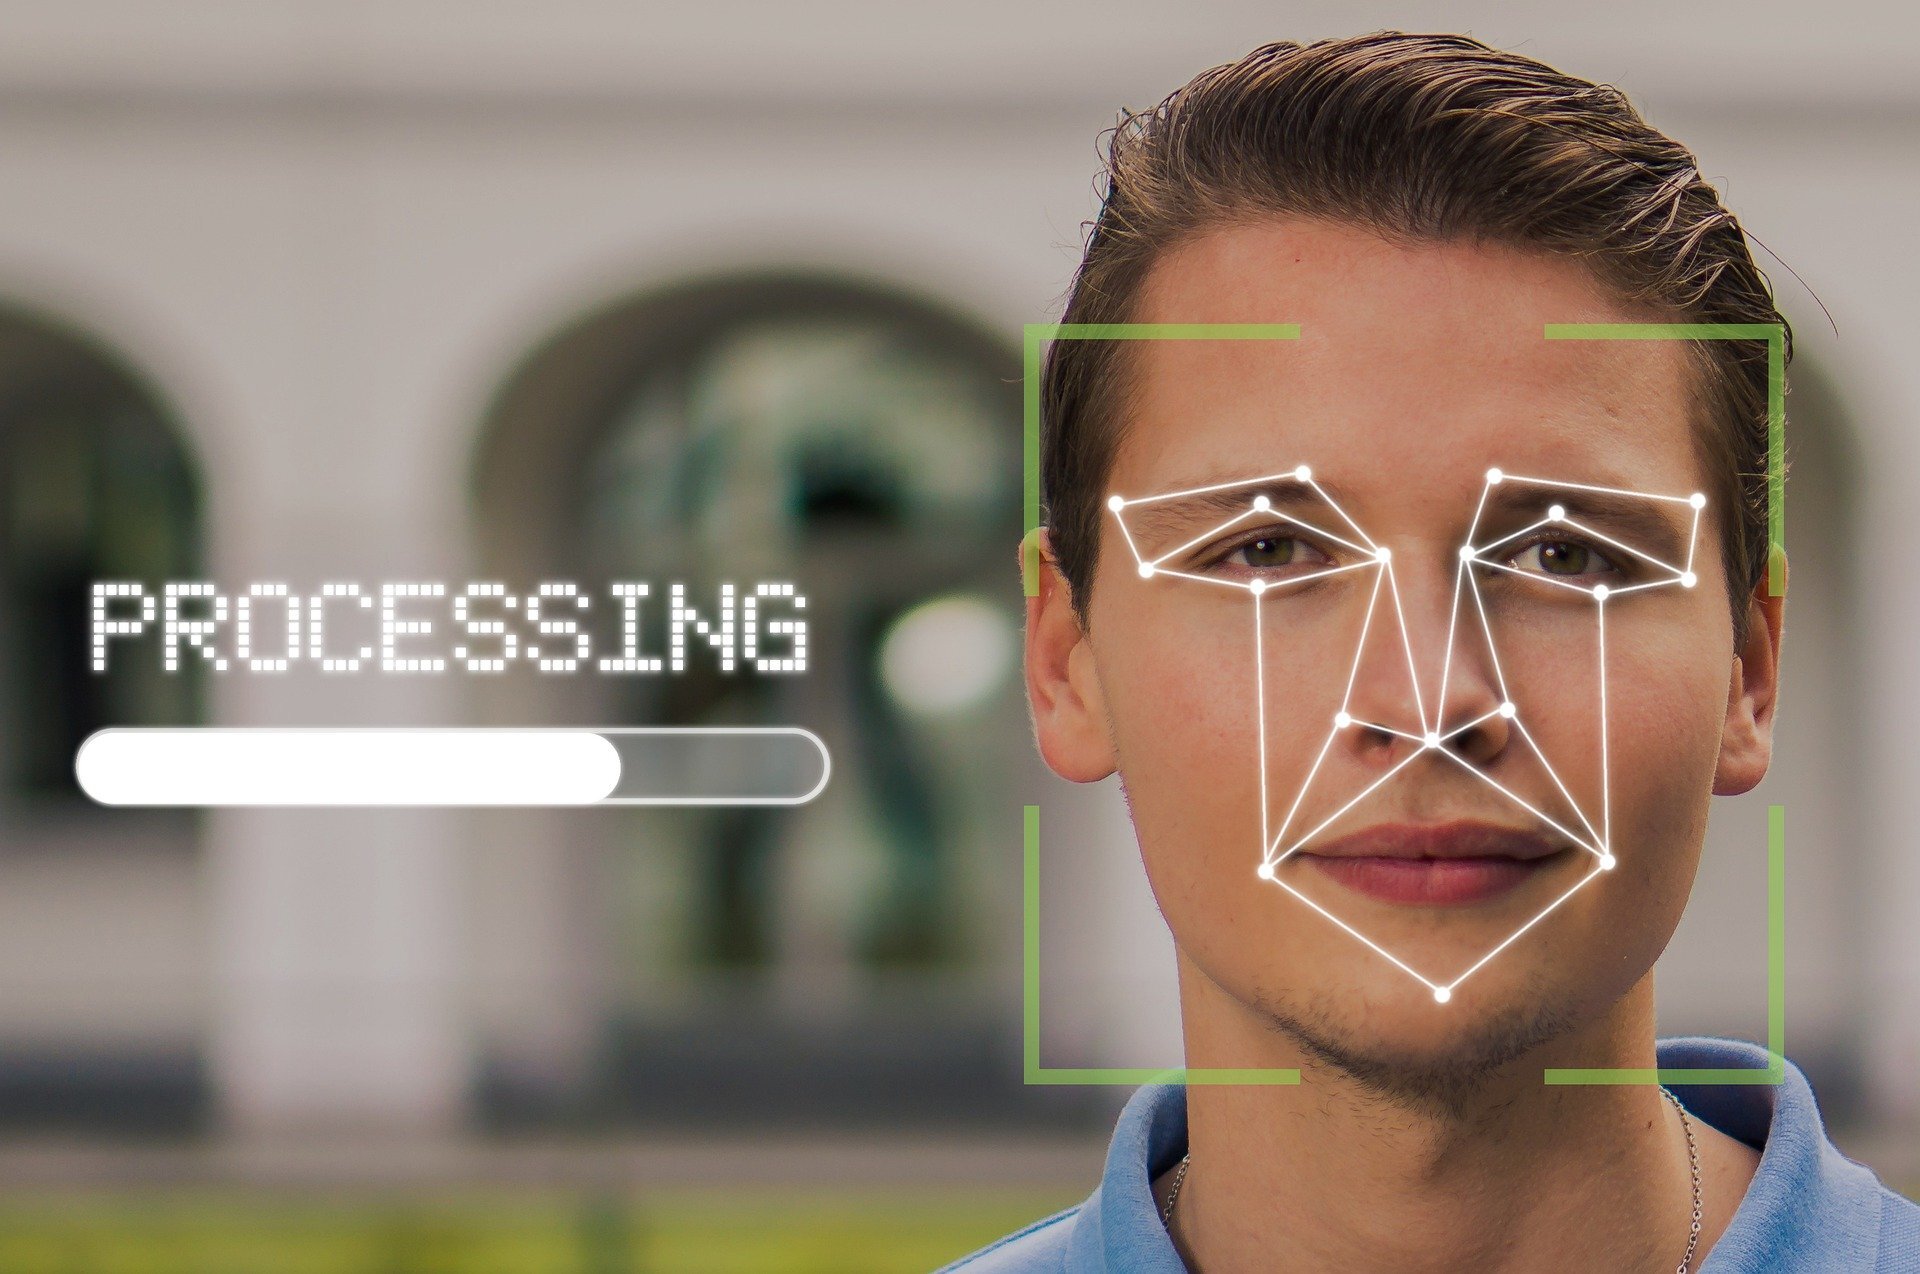 #New report offers blueprint for regulation of facial recognition technology